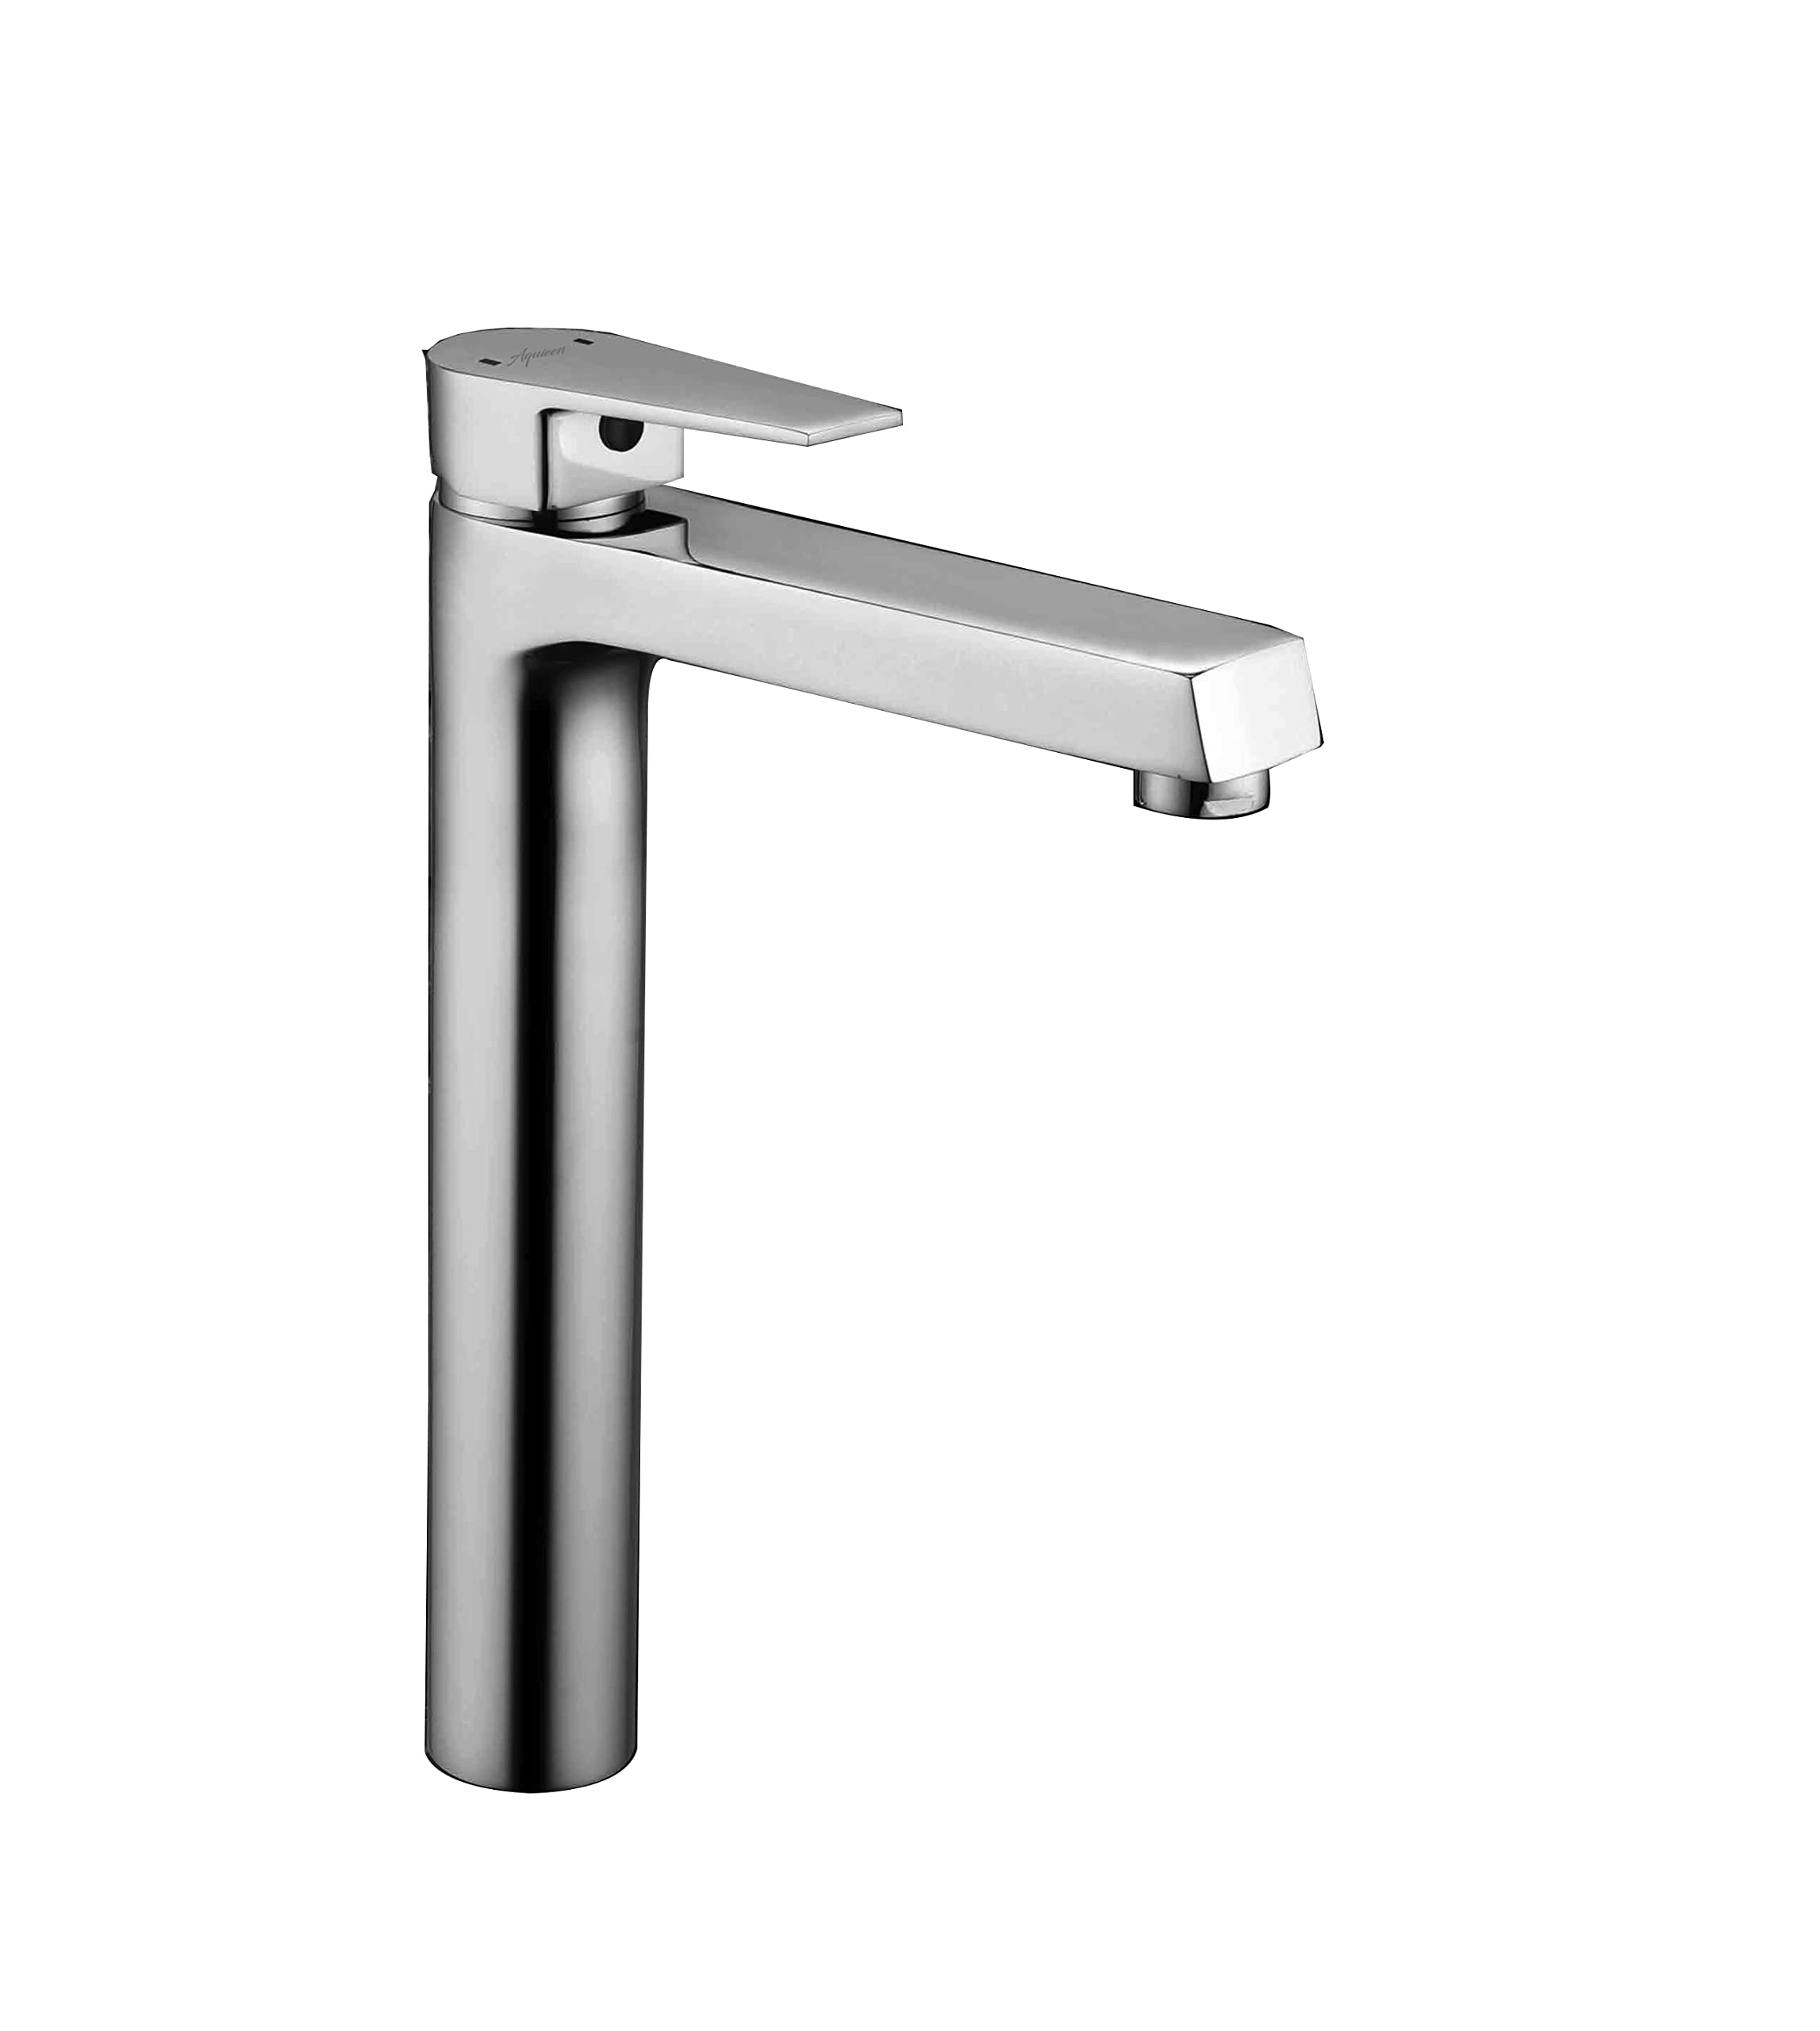 Aquieen Single Lever Basin Mixer Extended Tall Body with 600 mm Connecting Hoses (Aura, Chrome)